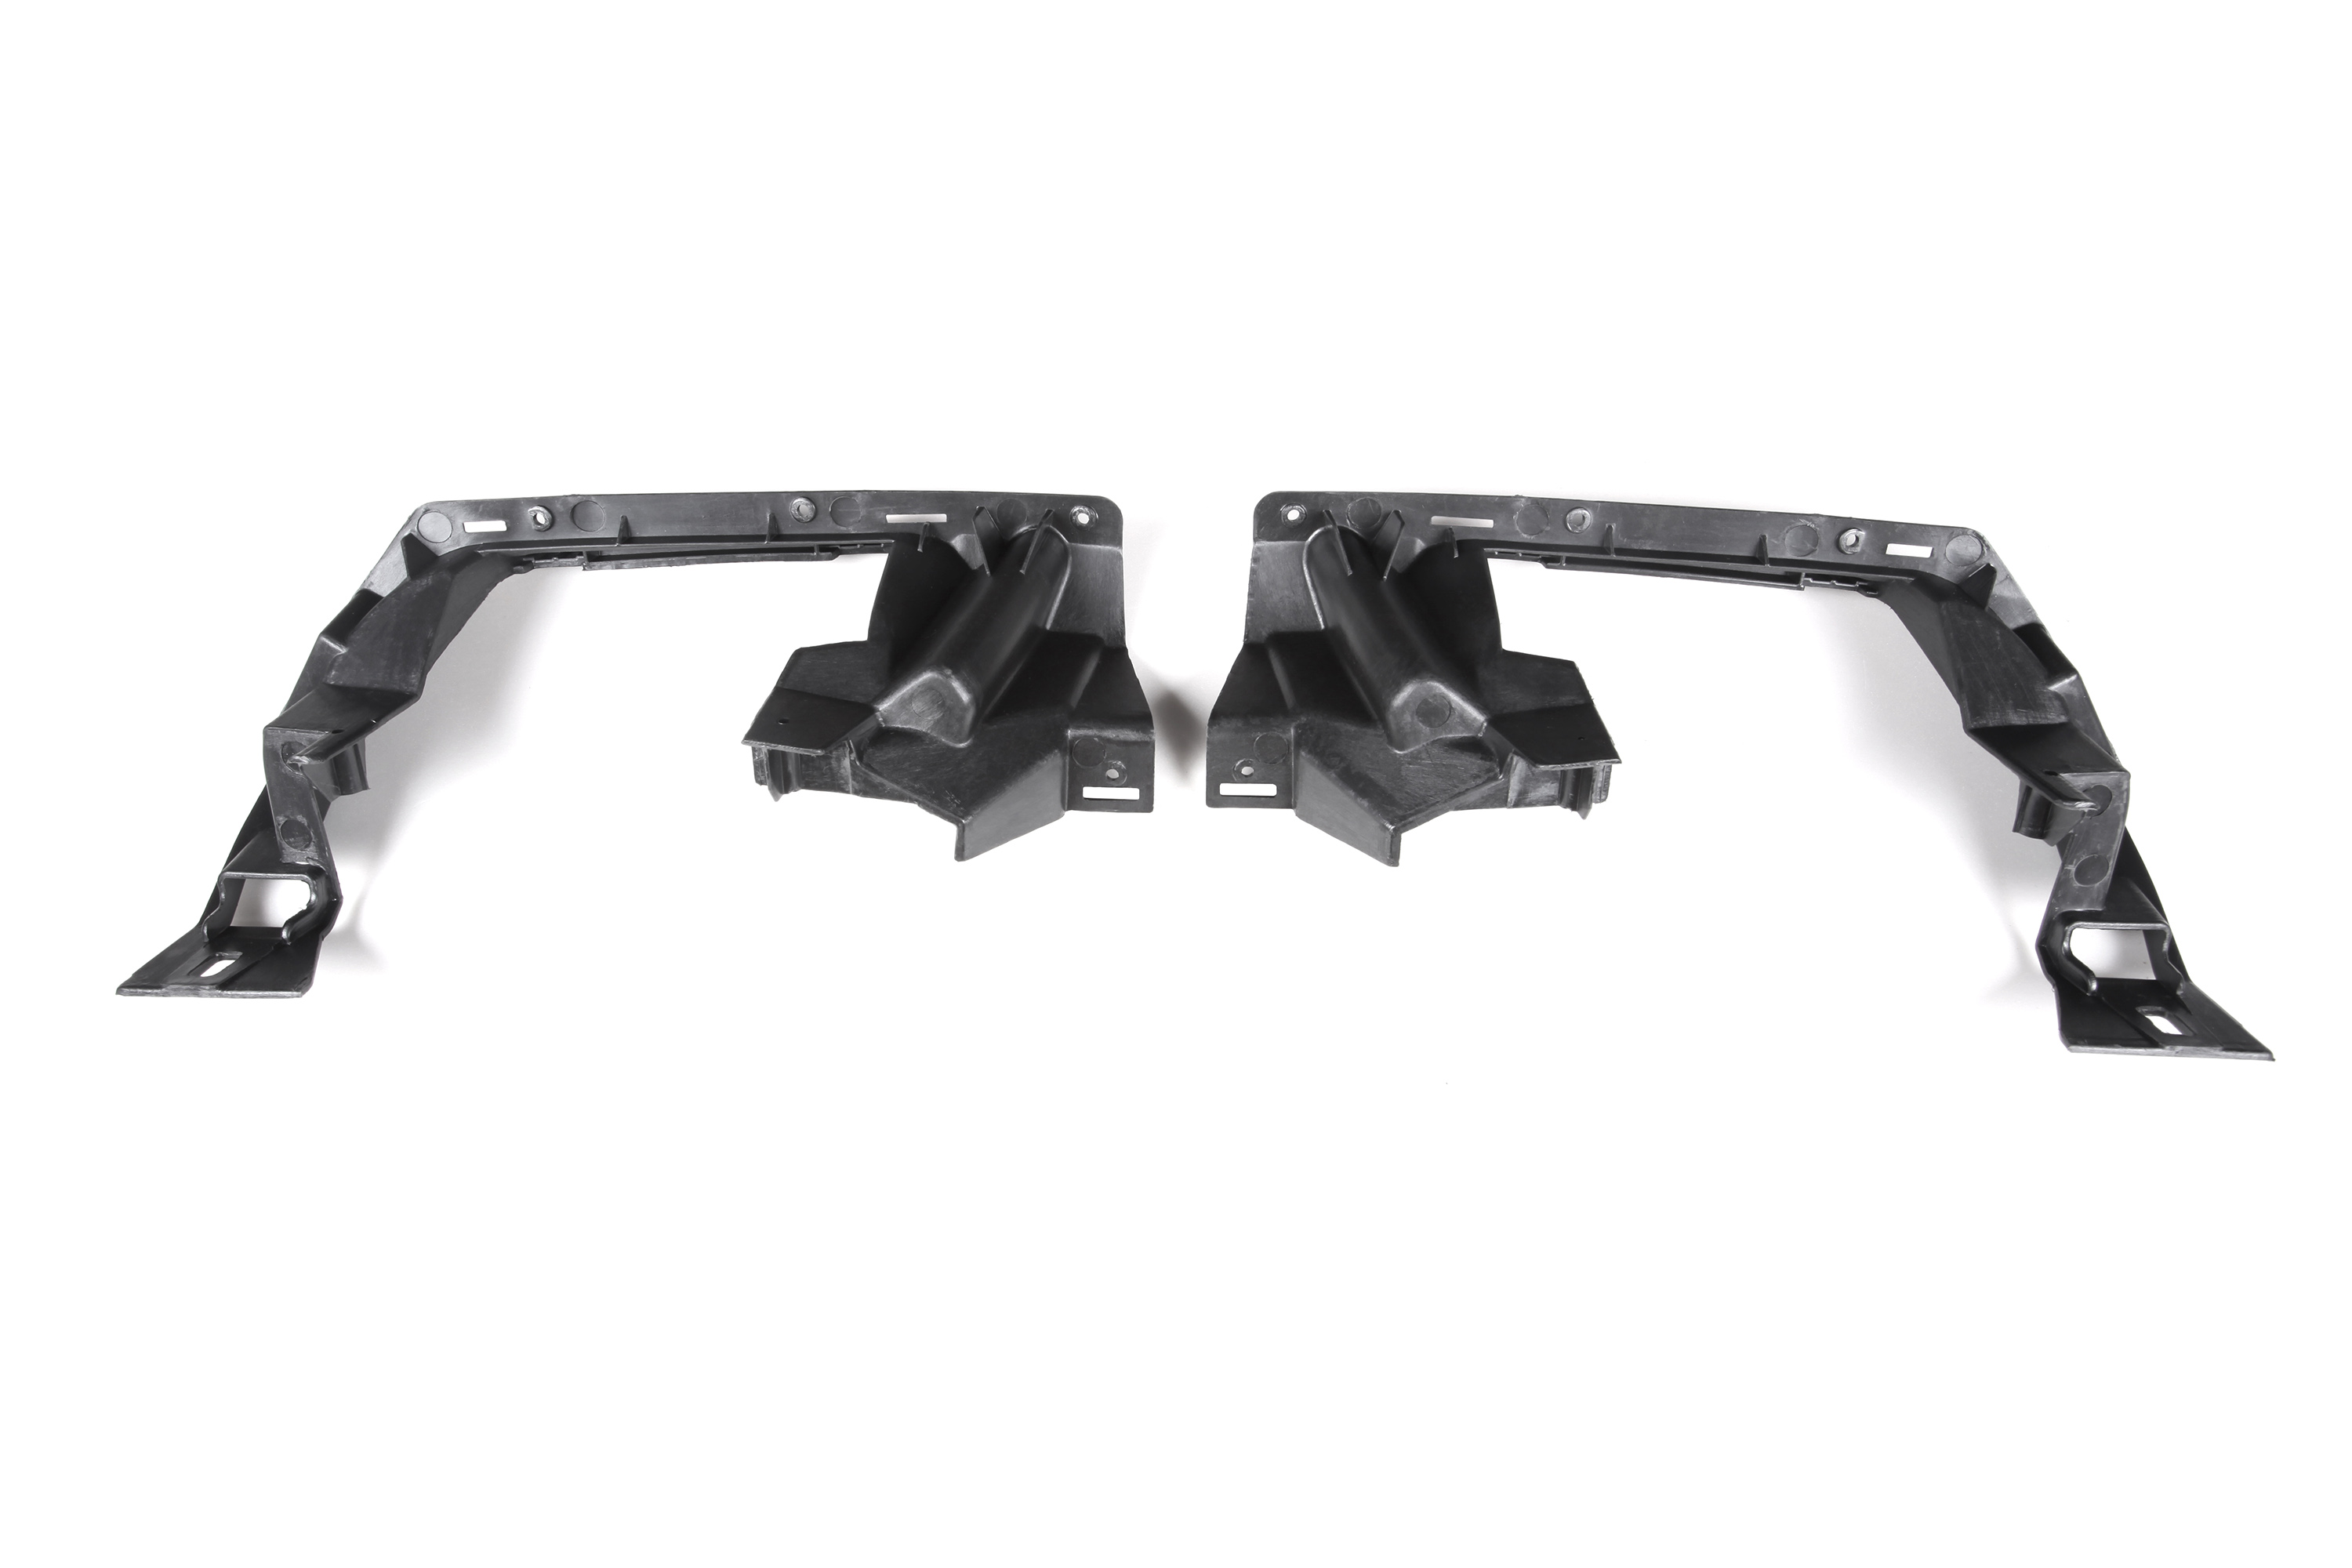 Zero Offset  AMG Style Rear Diffuser & Exhaust Tips for Mercedes A Class W176 13-18 + - MODE Auto Concepts